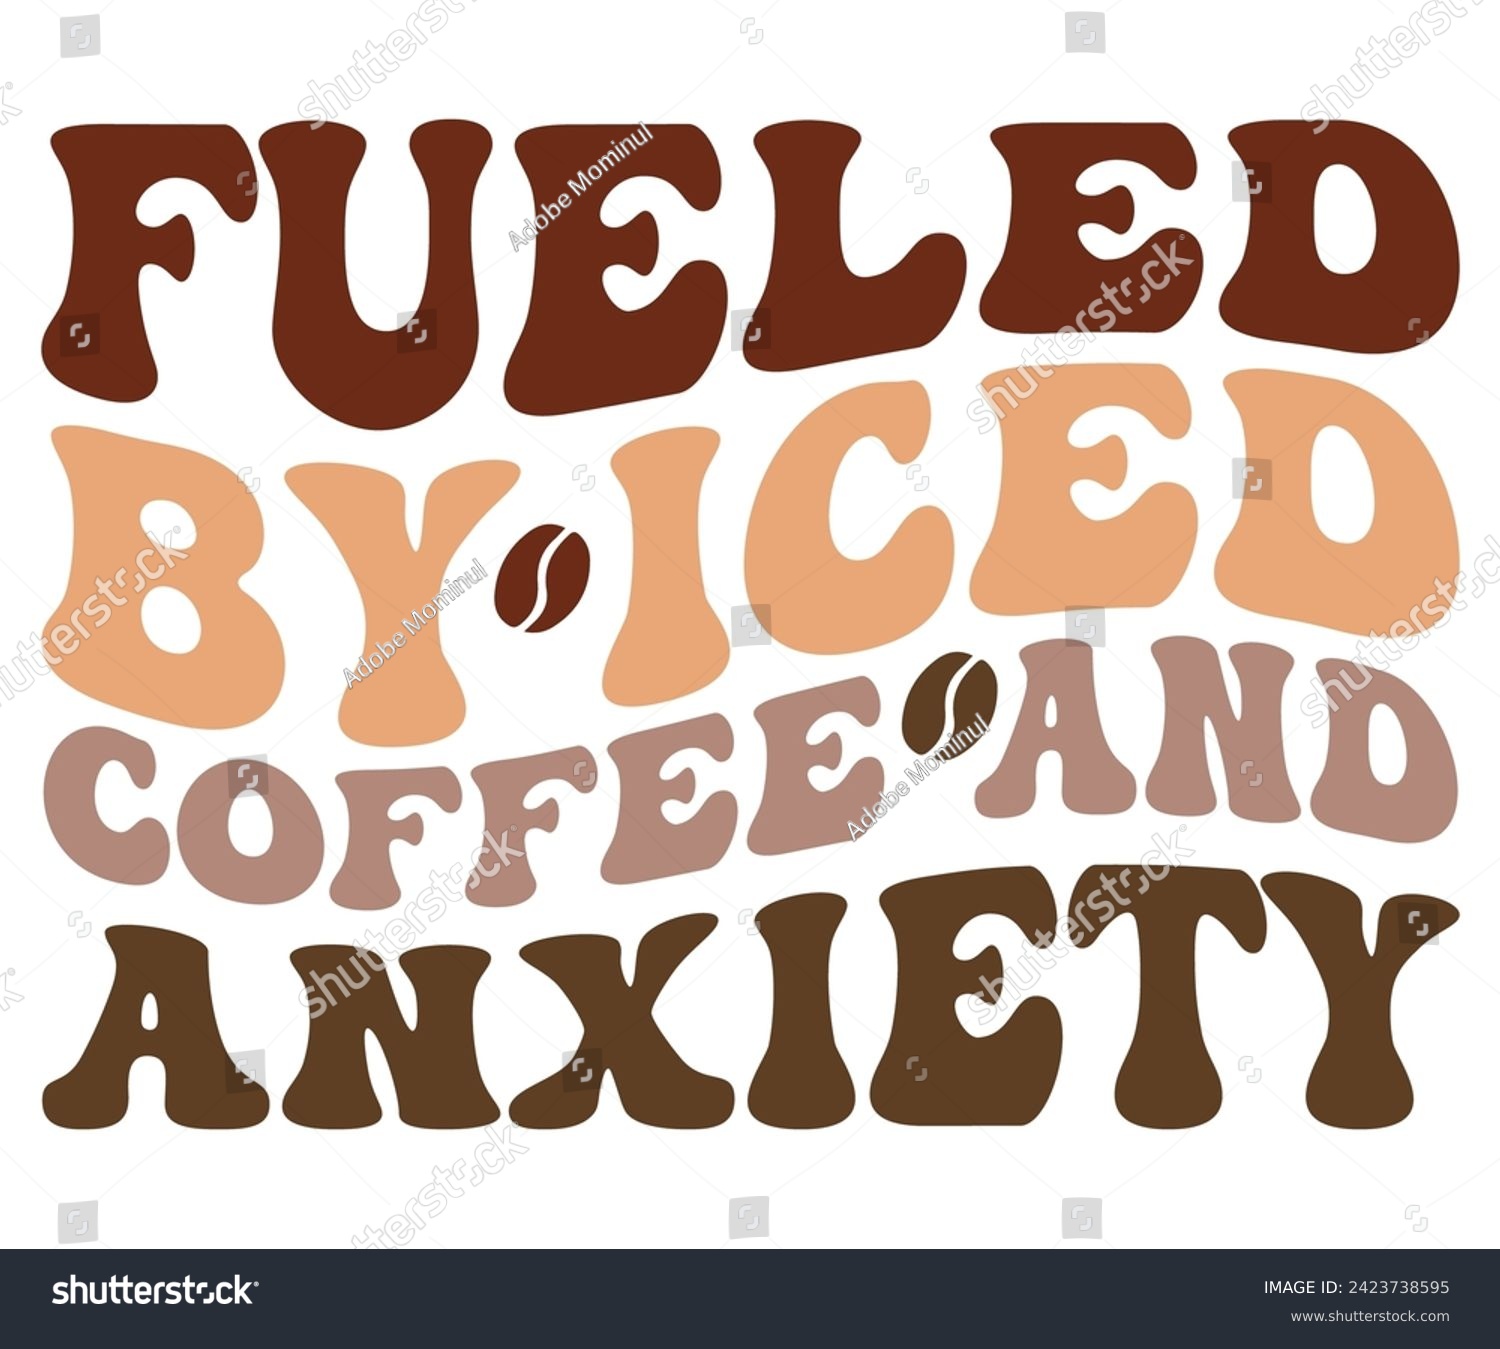 SVG of Fueled By Iced Coffee and Anxiety,Coffee Svg,Coffee Retro,Funny Coffee Sayings,Coffee Mug Svg,Coffee Cup Svg,Gift For Coffee,Coffee Lover,Caffeine Svg,Svg Cut File,Coffee Quotes,Sublimation Design, svg